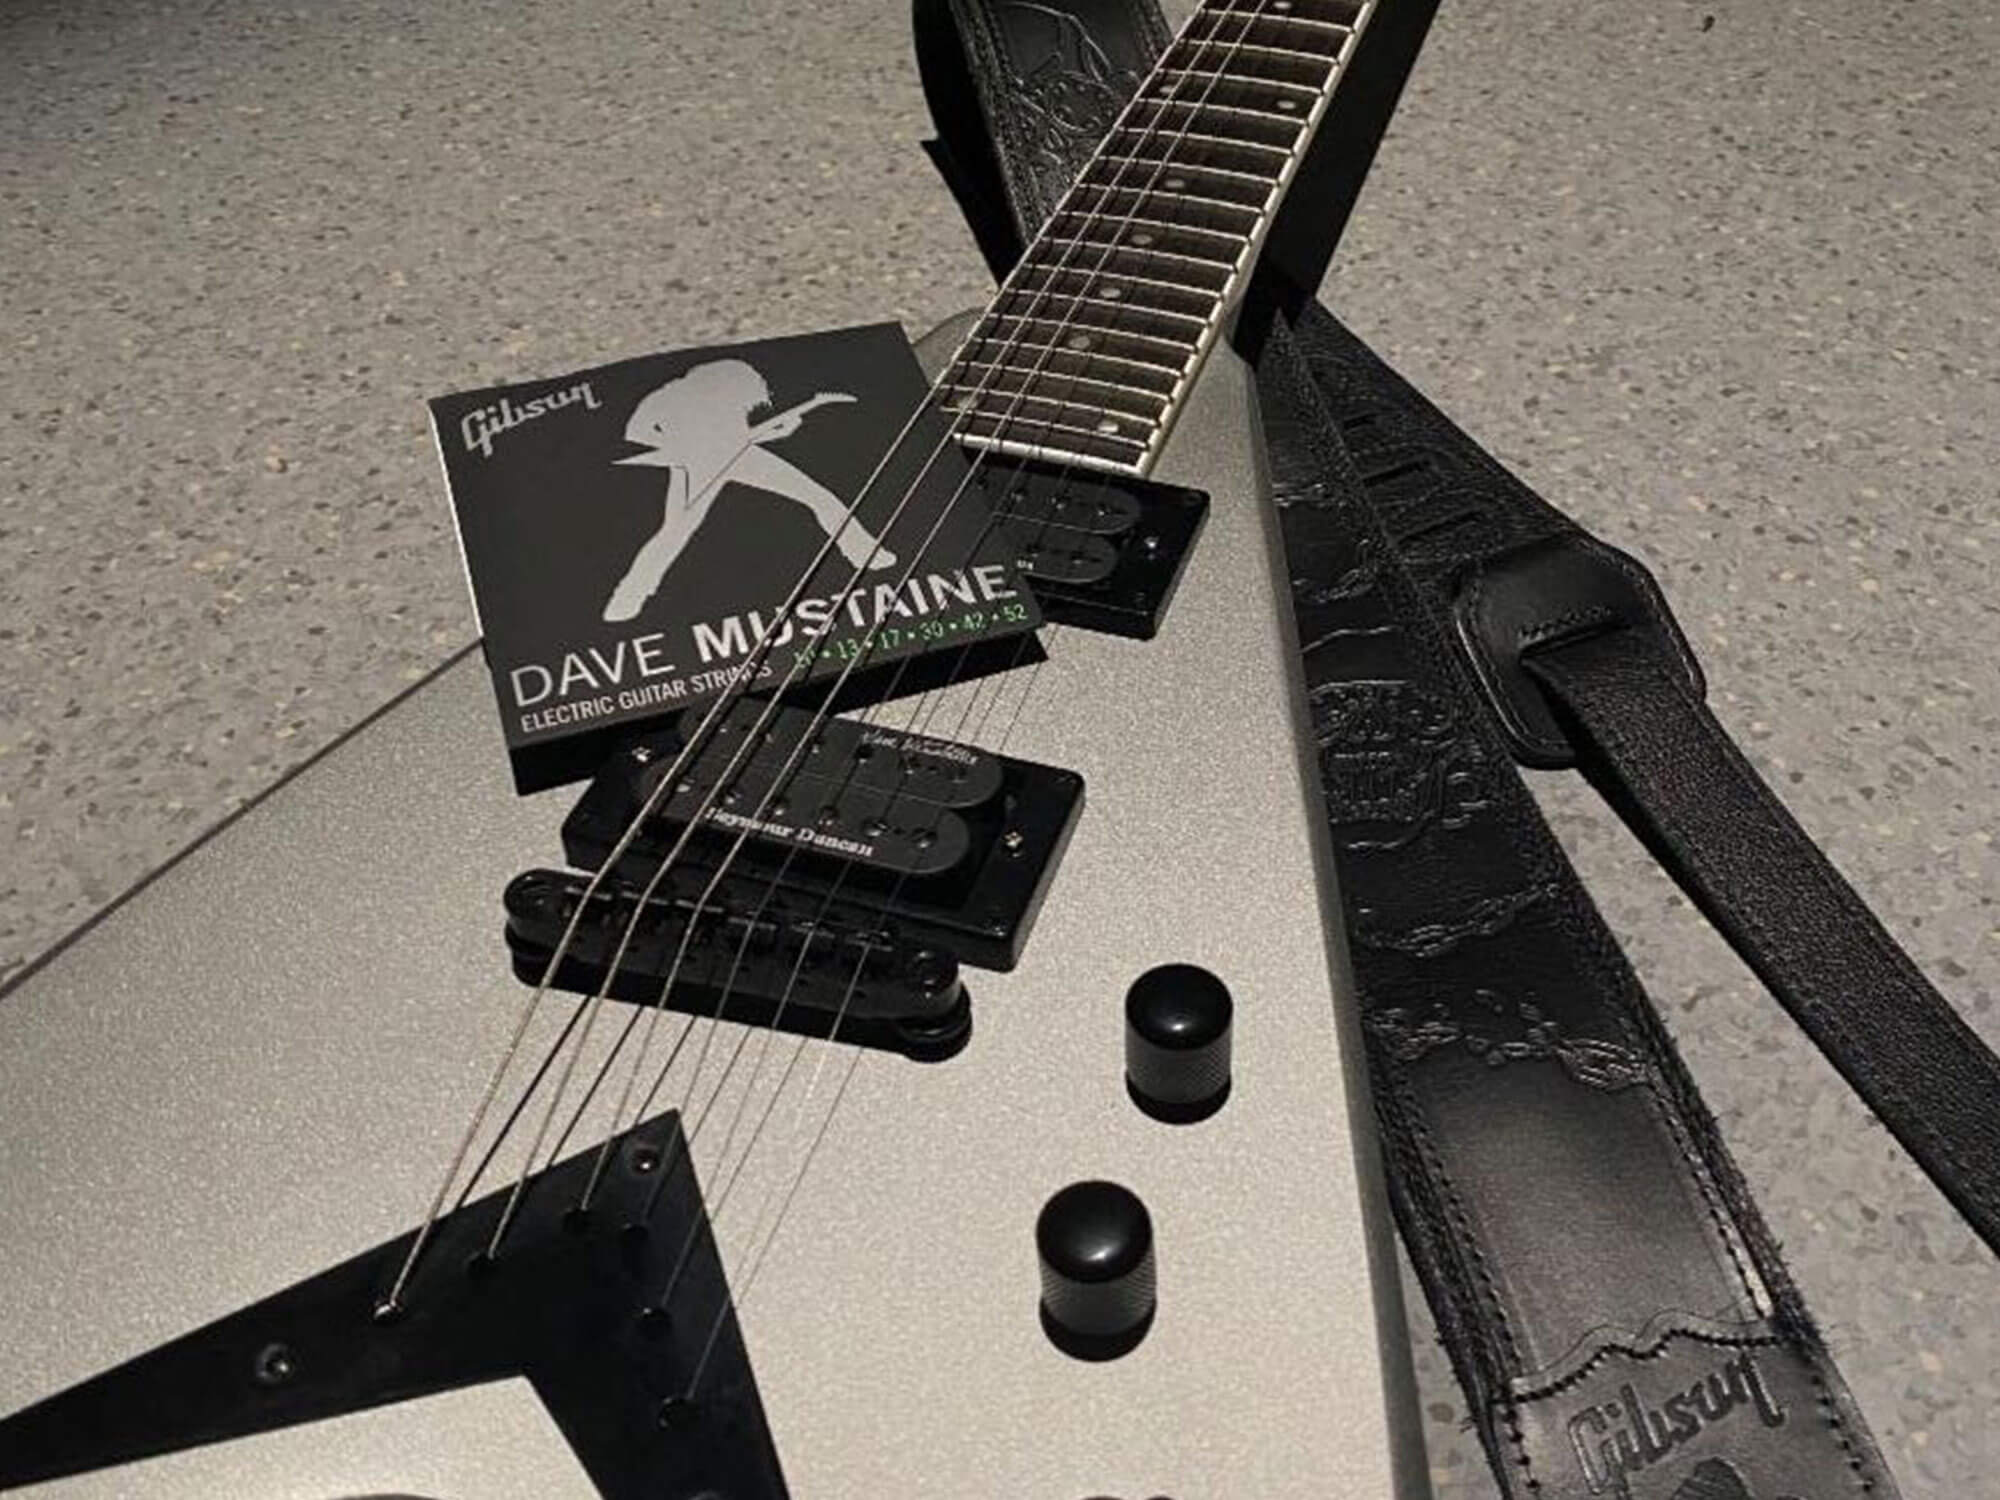 Gibson Dave Mustaine strings